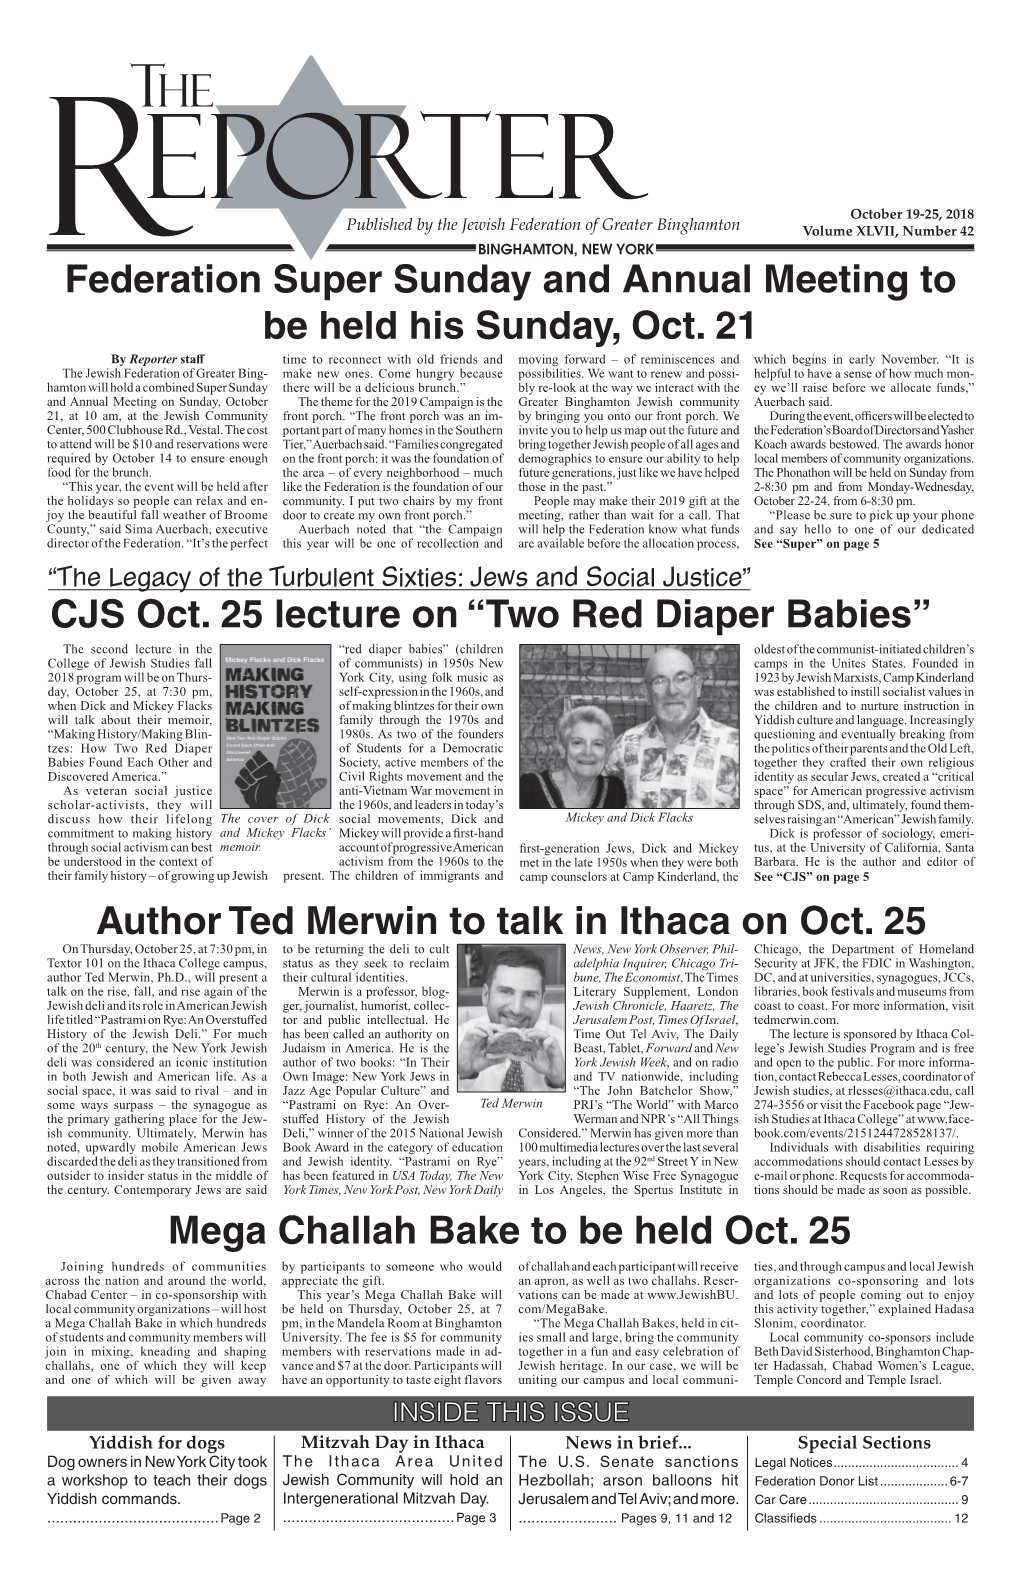 CJS Oct. 25 Lecture on “Two Red Diaper Babies” Federation Super